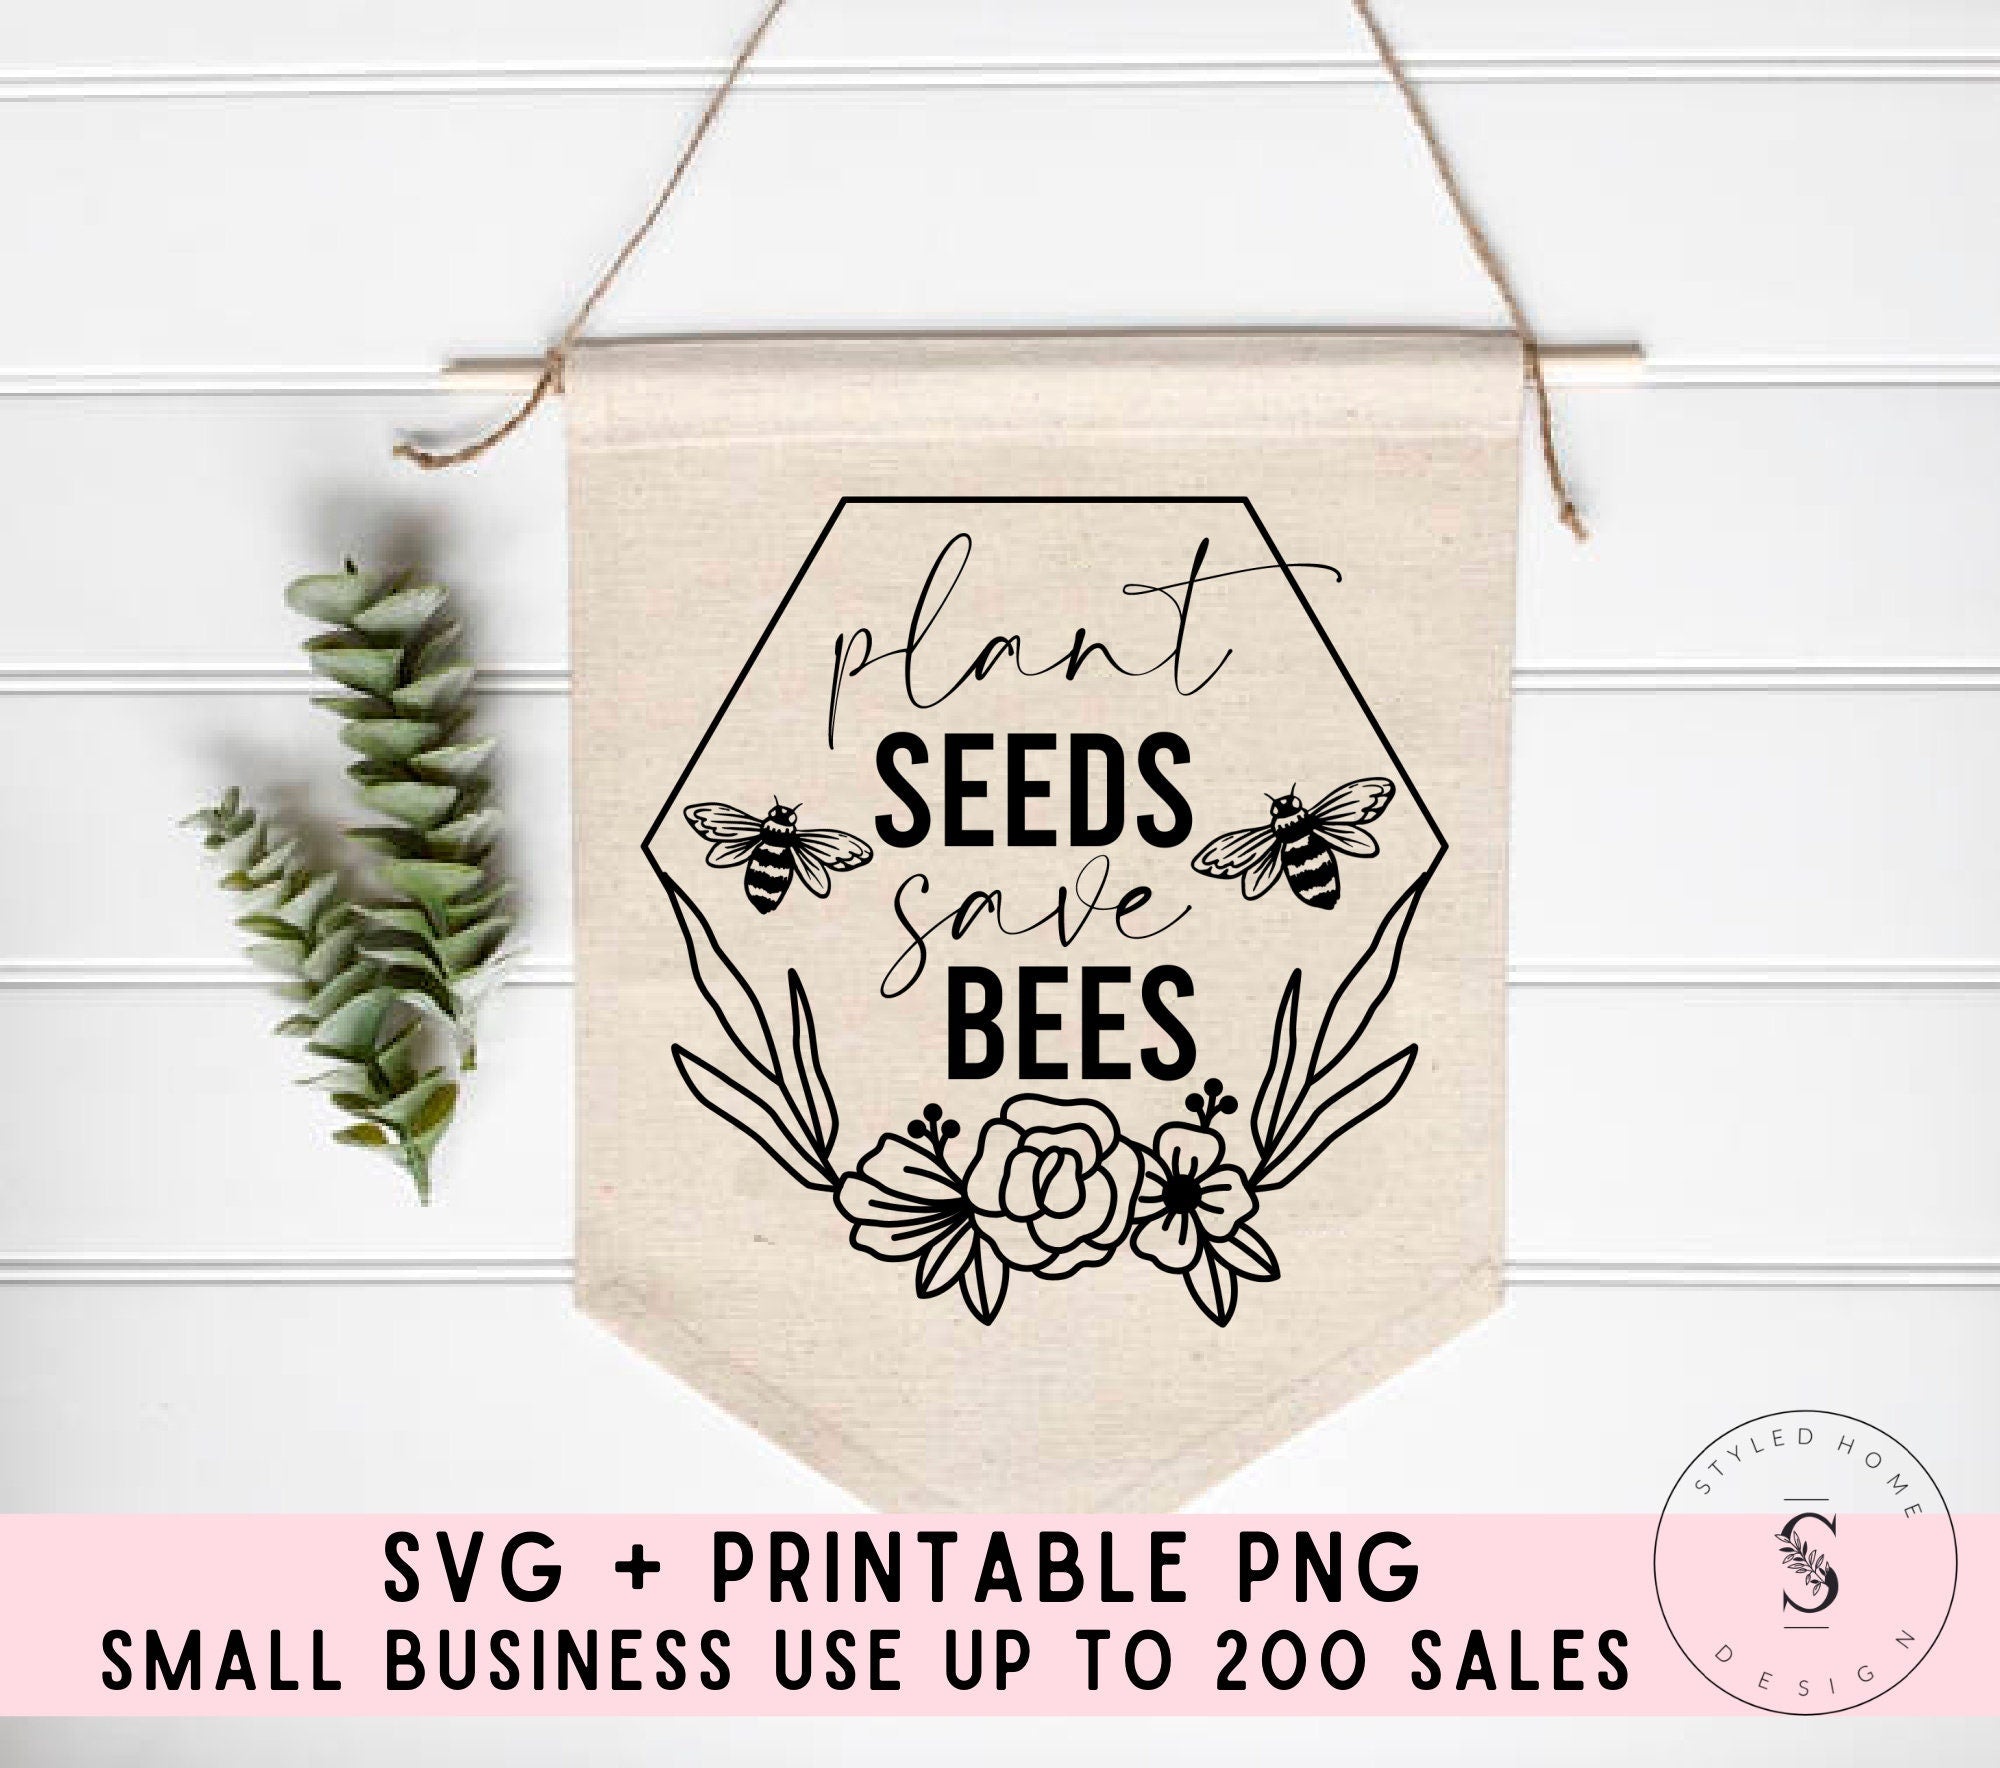 Save Bees Save the Earth Raise a Wild Flower Retro Boho Vintage Spring SVG Cut File Printable PNG Silhouette CricutSublimation